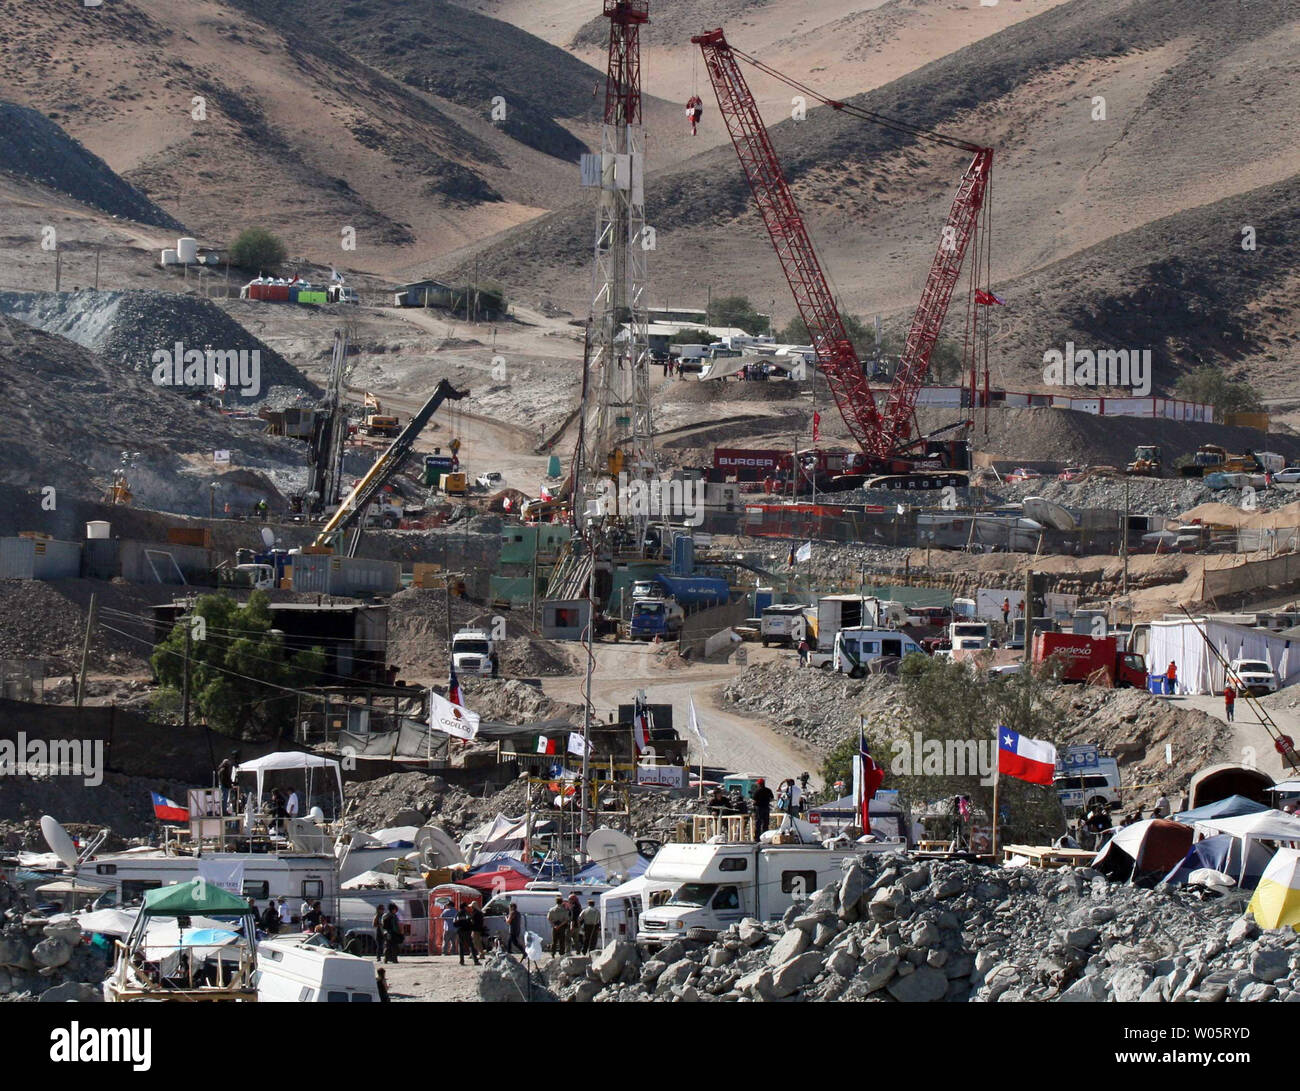 Campers with more than 2,000 family members, workers and press dot the landscape of Camp Hope next to the 33 trapped miners at San Jose Mine, Chile on October 11, 2010.   If all goes well, officials say the first miners will be brought up via a 20-minute ride in a rescue capsule more than 2,000 feet below the surface.   The miners have been trapped for more than two months.   UPI/Sebastian Padilla Stock Photo